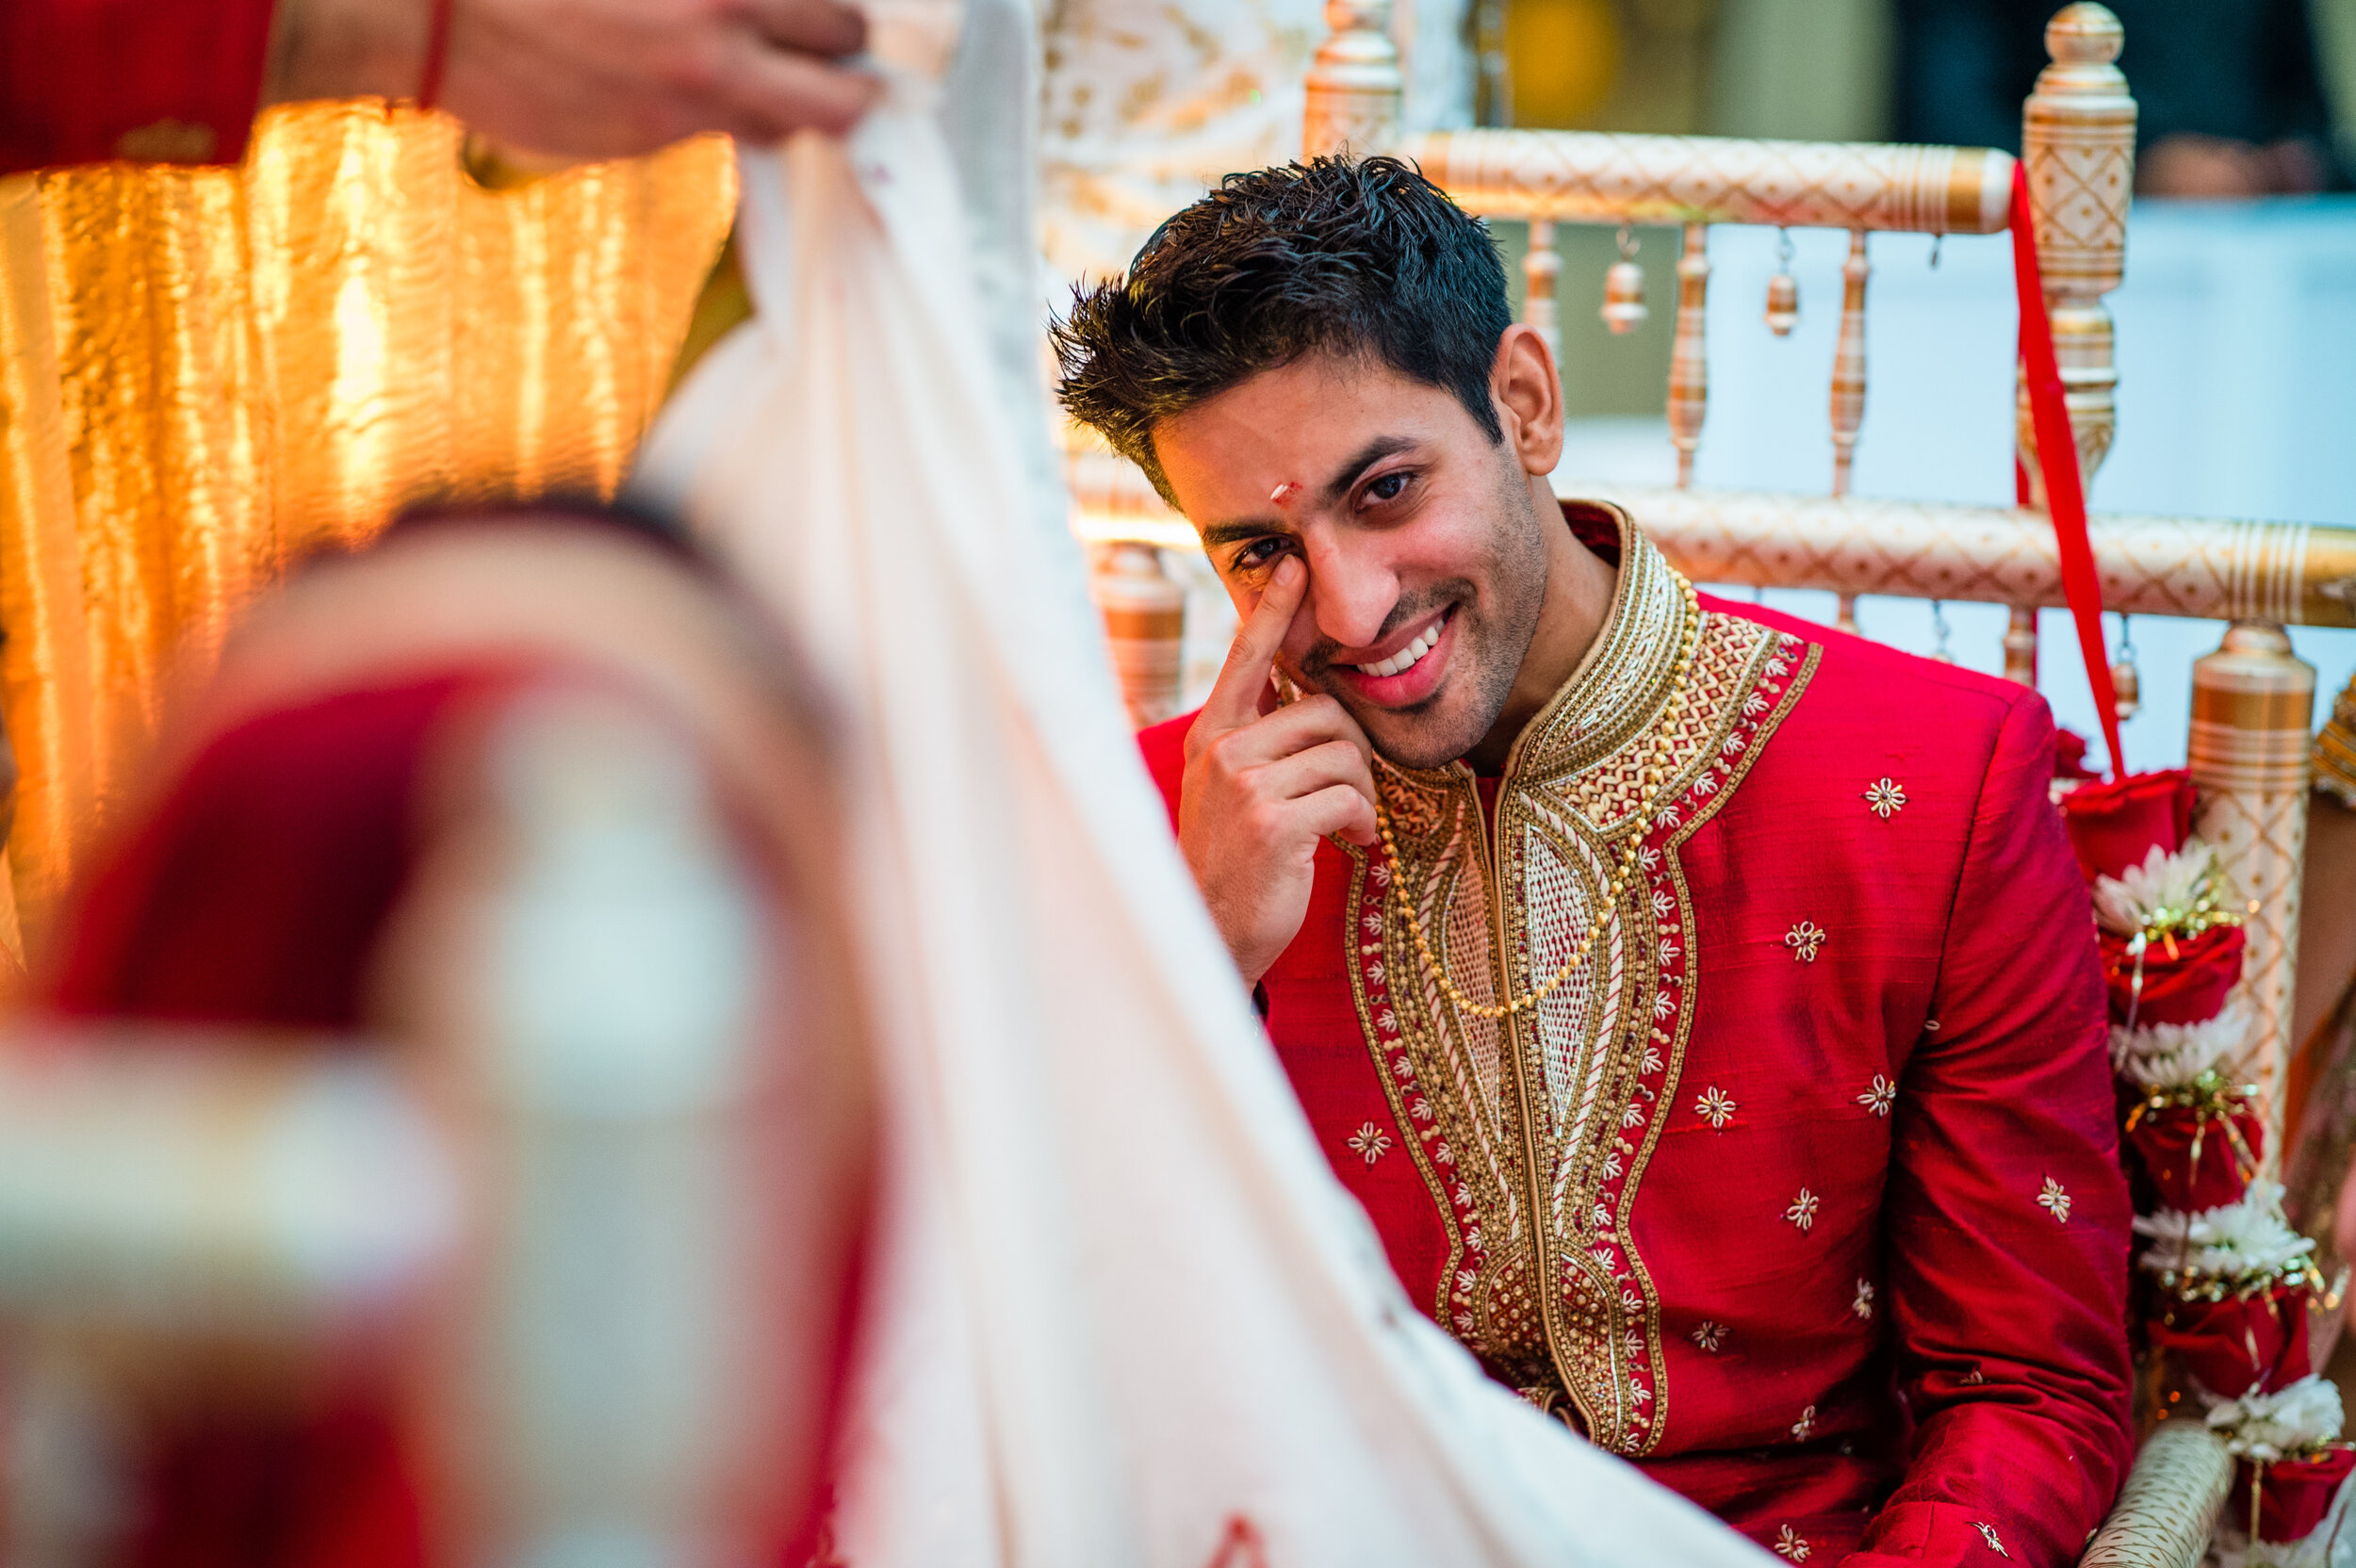  The groom wipes away tears at the vidai during his wedding